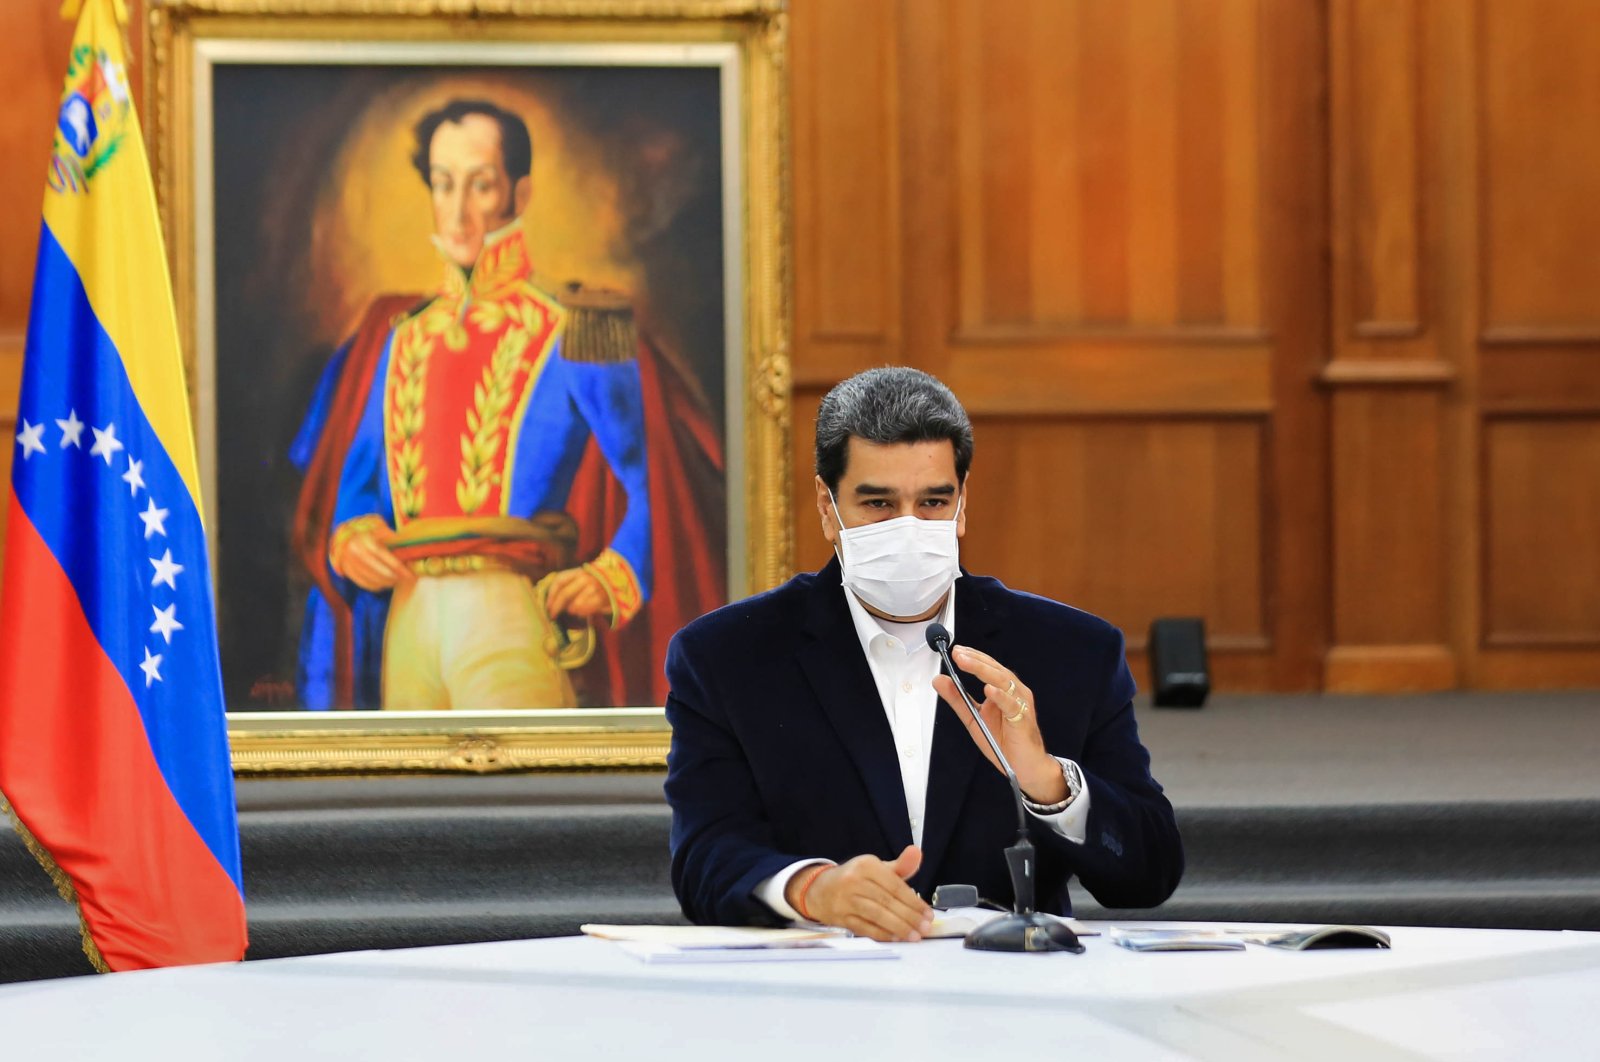 Venezuela's President Nicolas Maduro wears a face mask during a meeting with members of the Bolivarian National Armed Forces (FANB) at Miraflores Presidential Palace, Caracas, May 4, 2020. (AFP Photo)